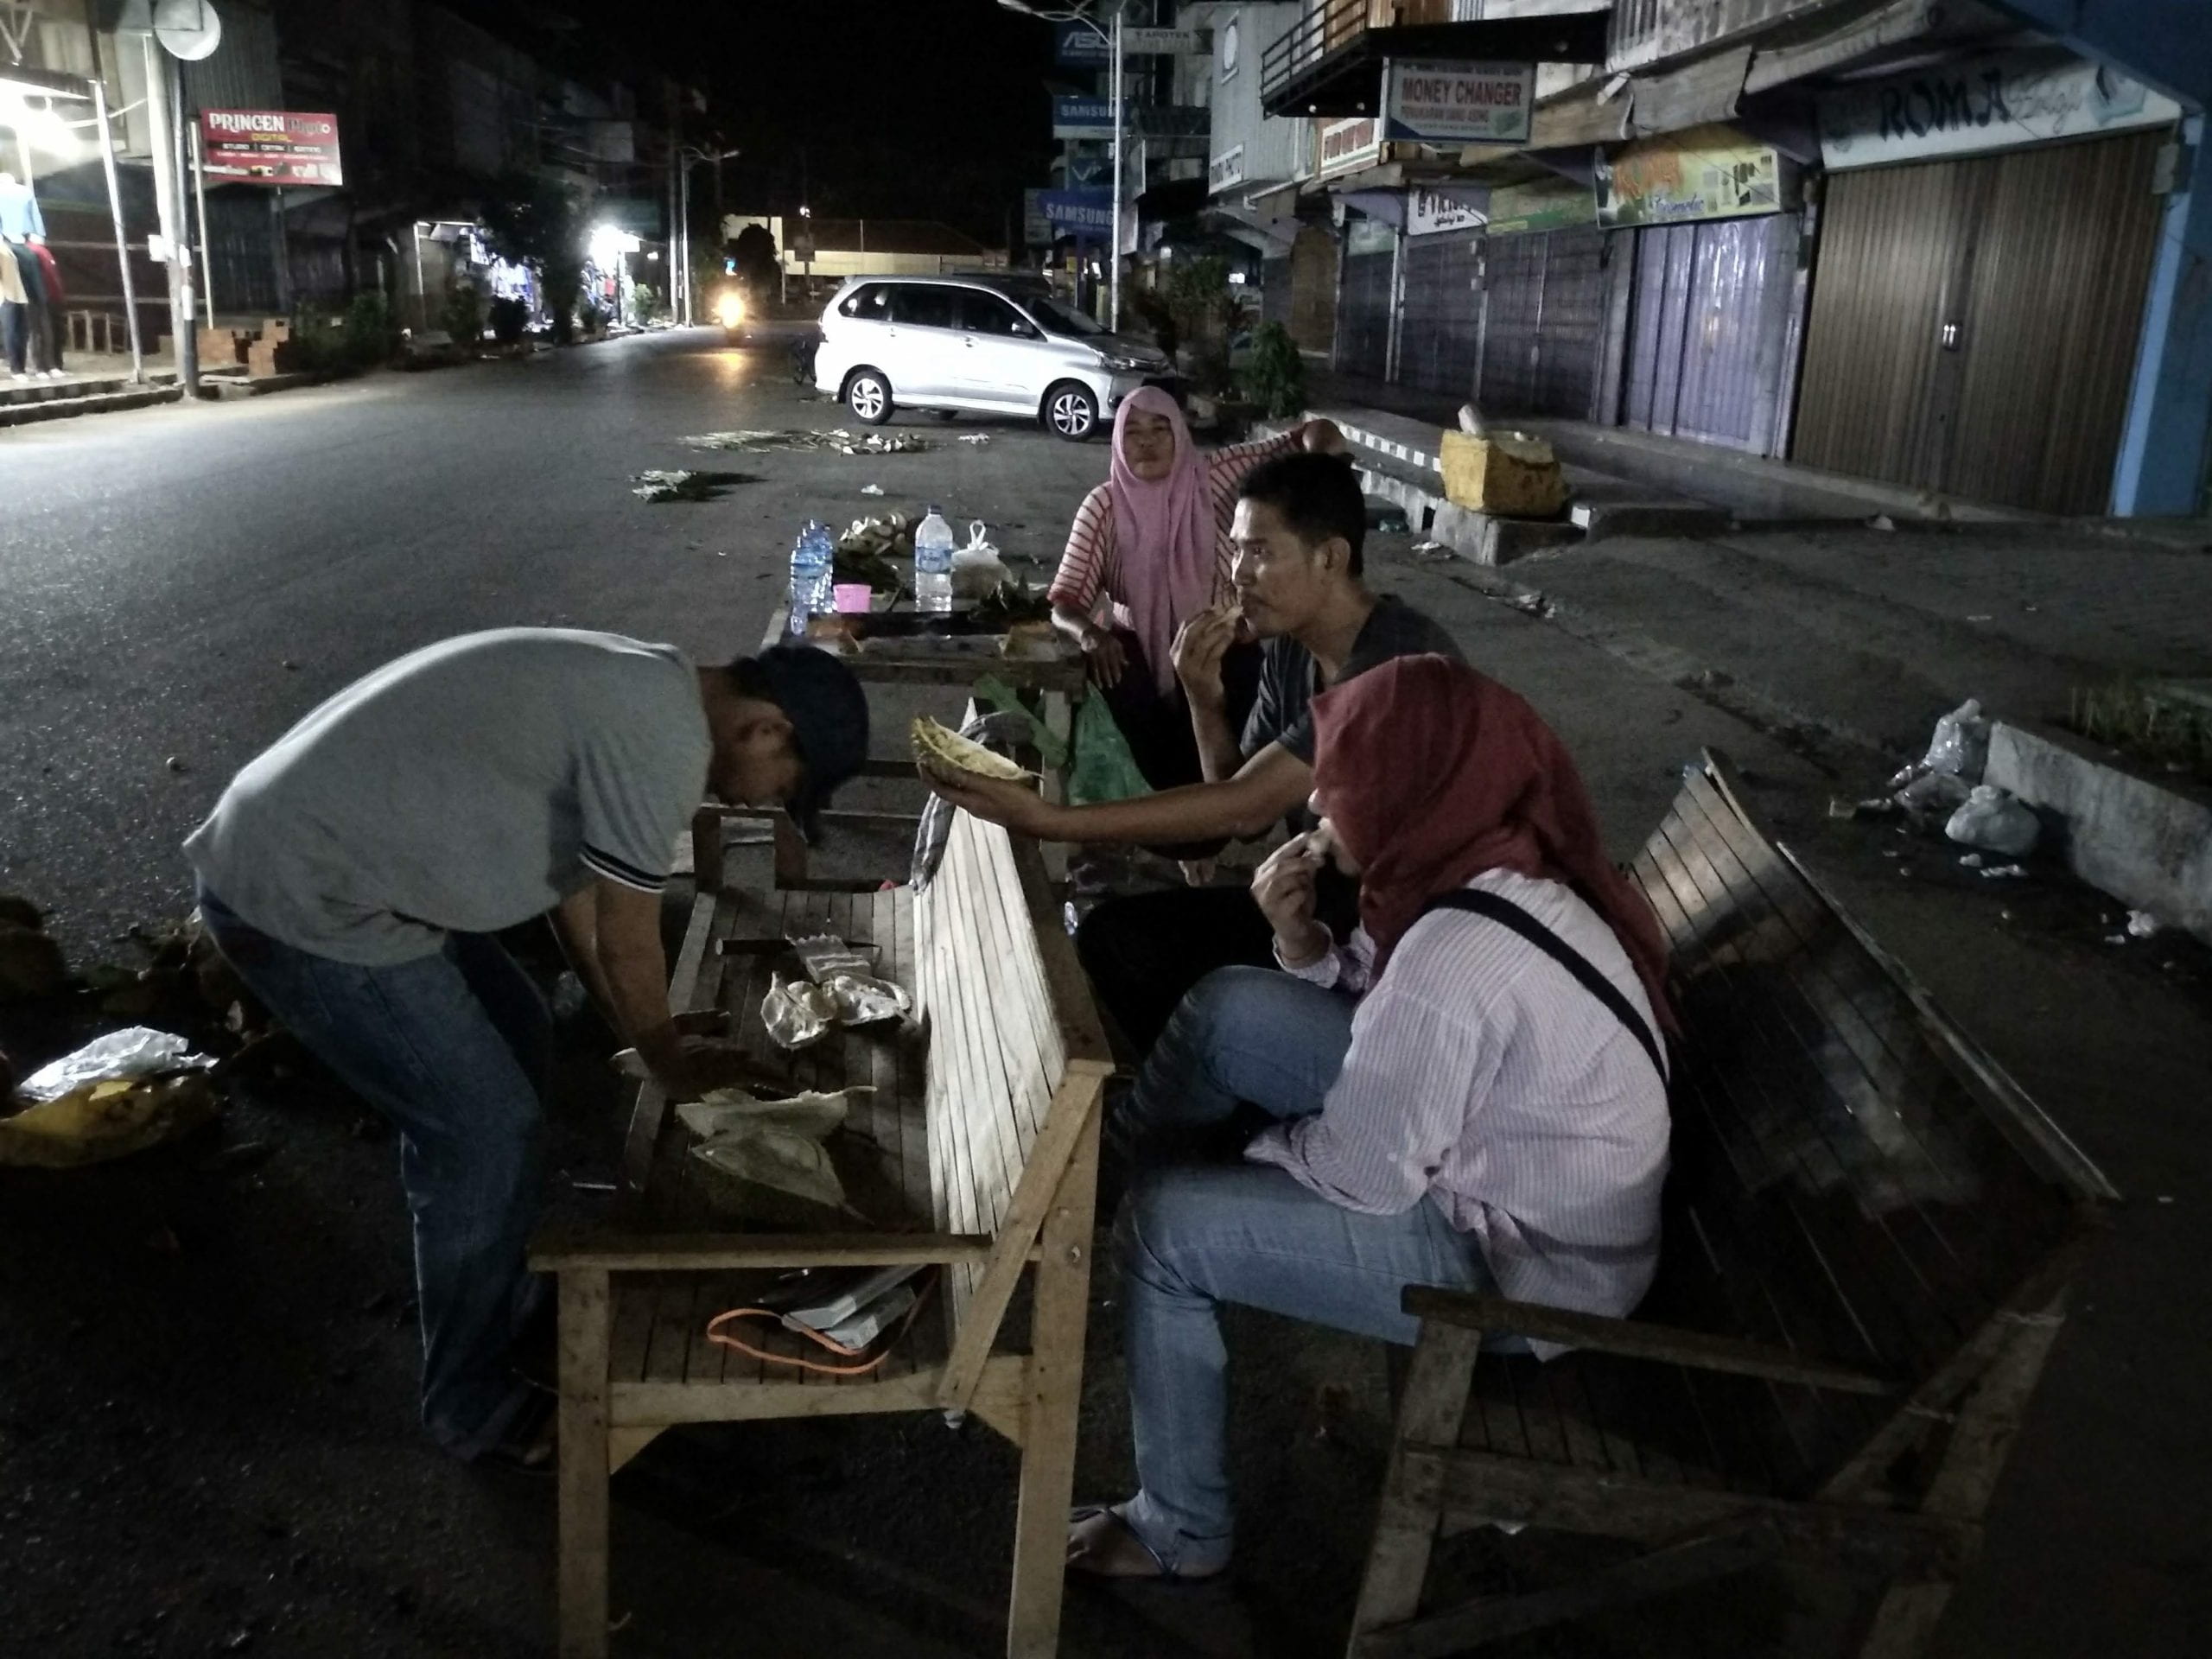 people eating durians outdoors at night in indonesia